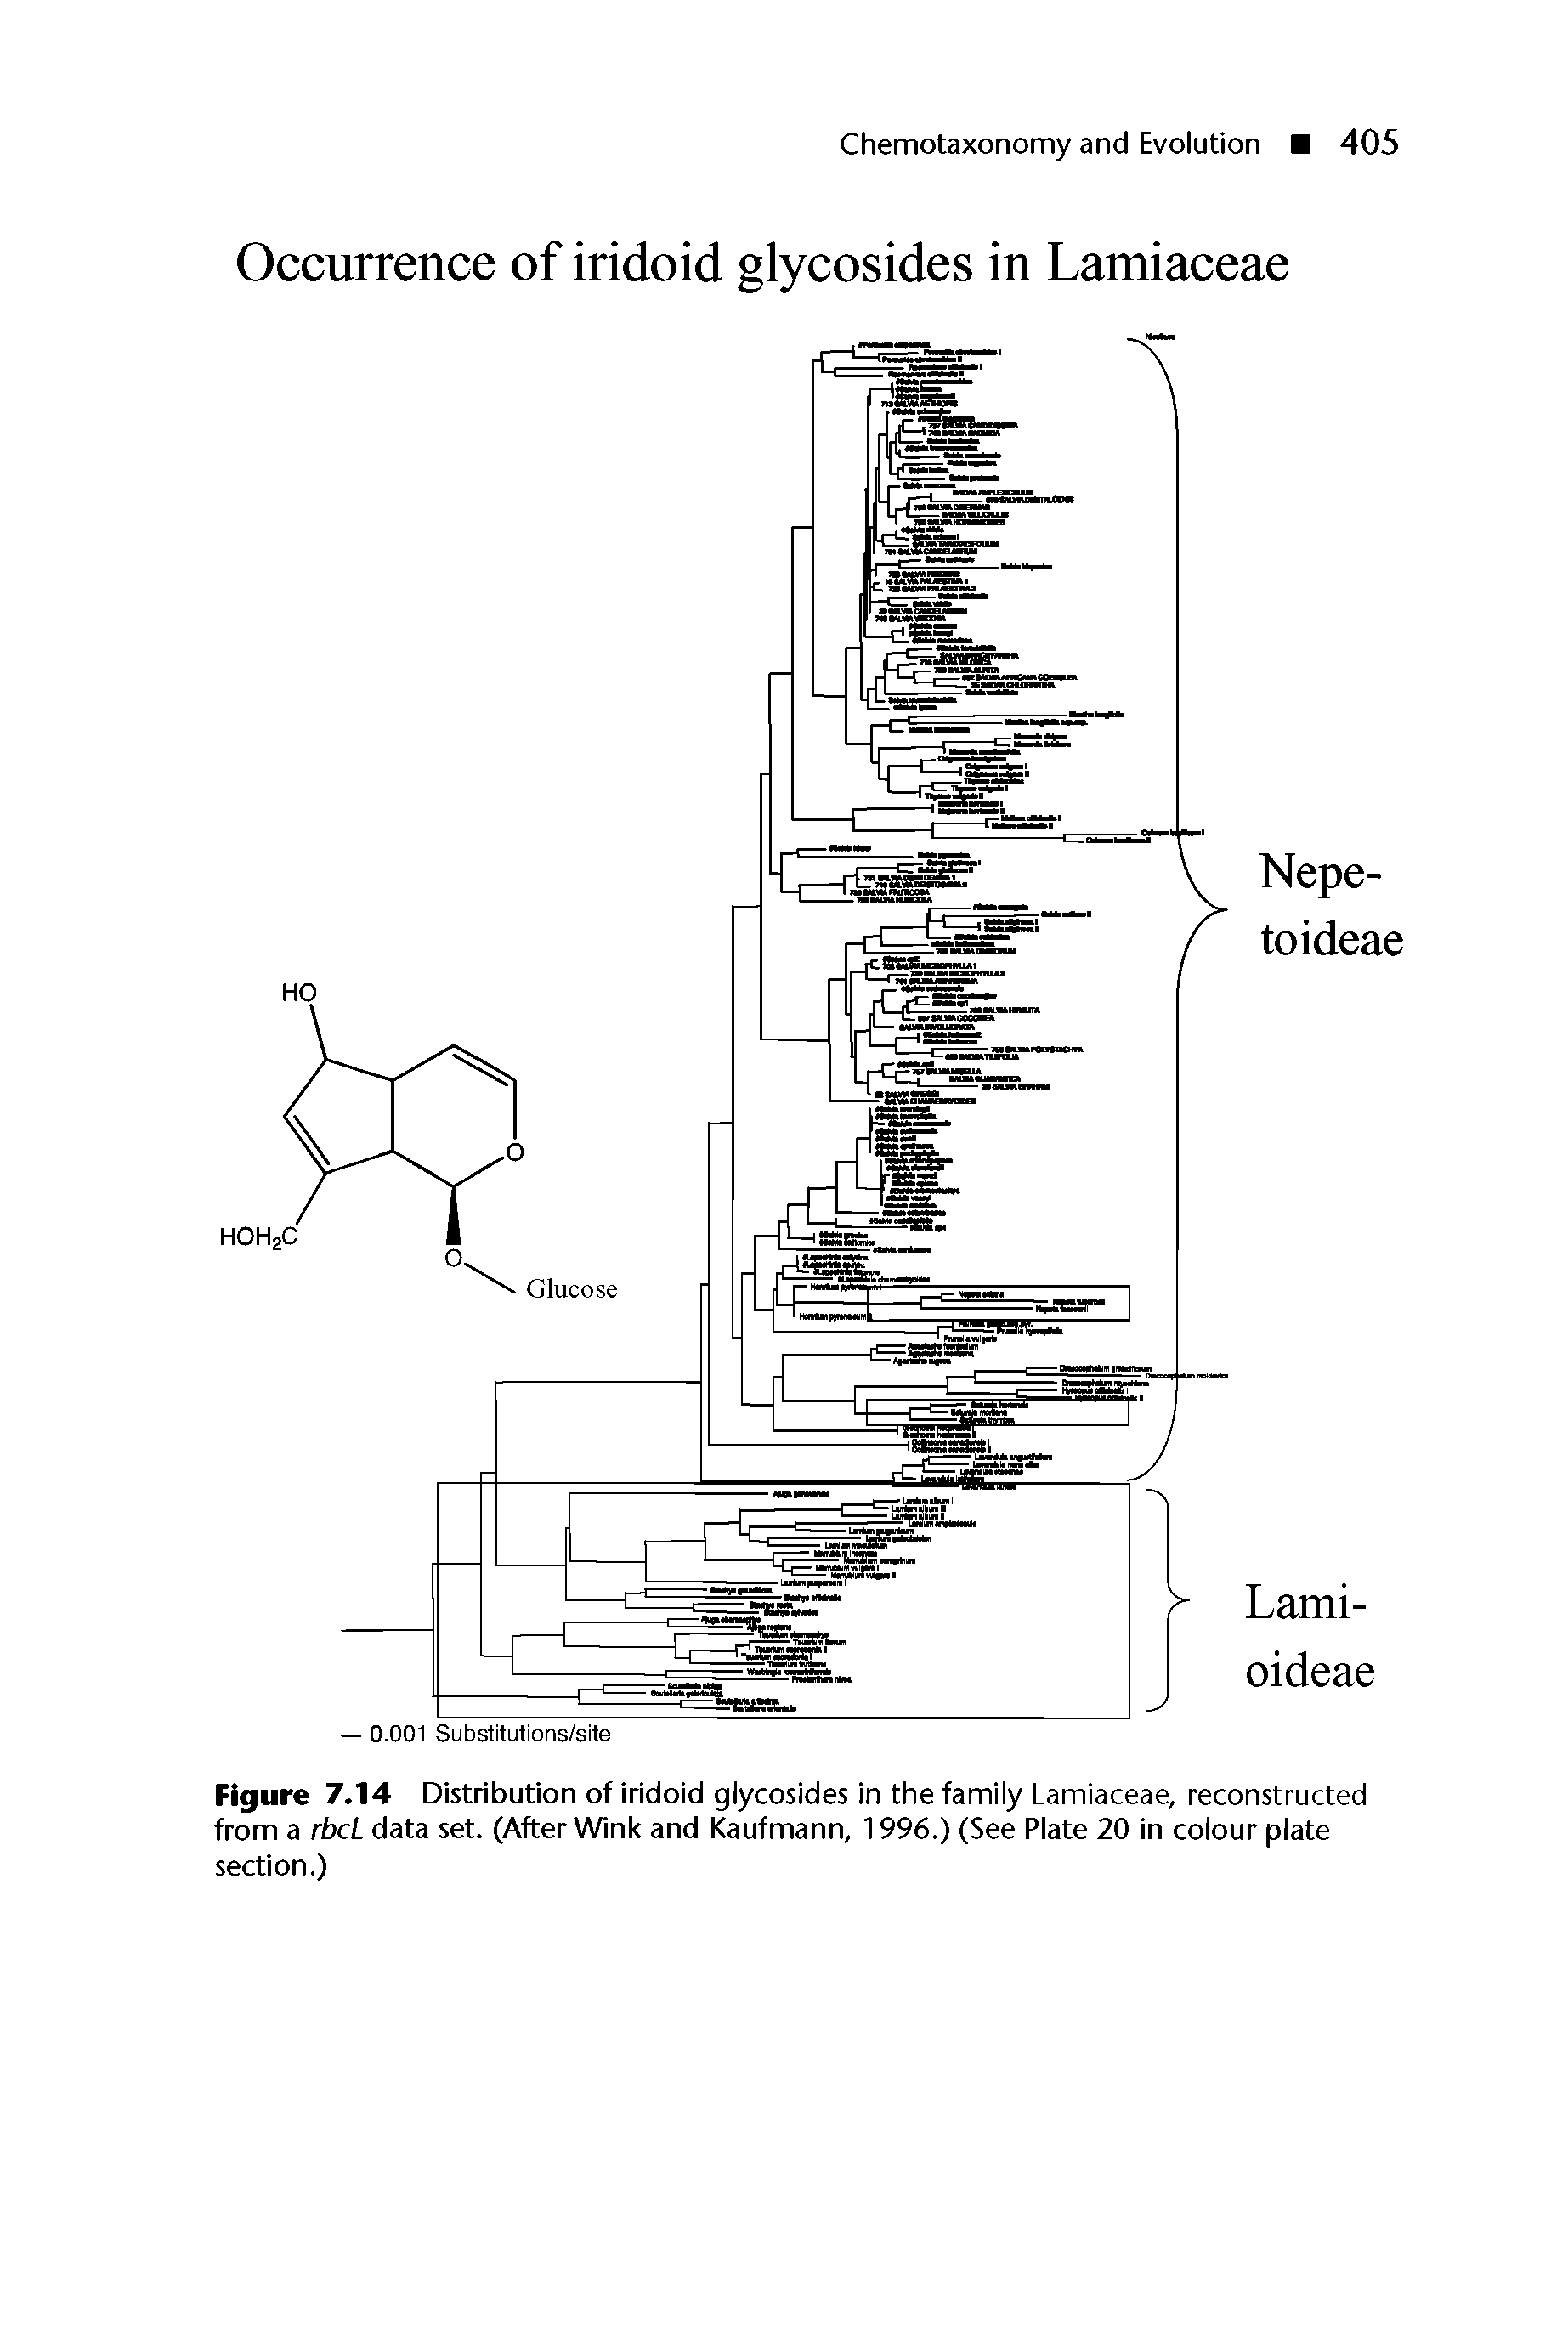 Figure 7.14 Distribution of iridoid glycosides in the family Lamiaceae, reconstructed from a rbcL data set. (After Wink and Kaufmann, 1996.) (See Plate 20 in colour plate section.)...